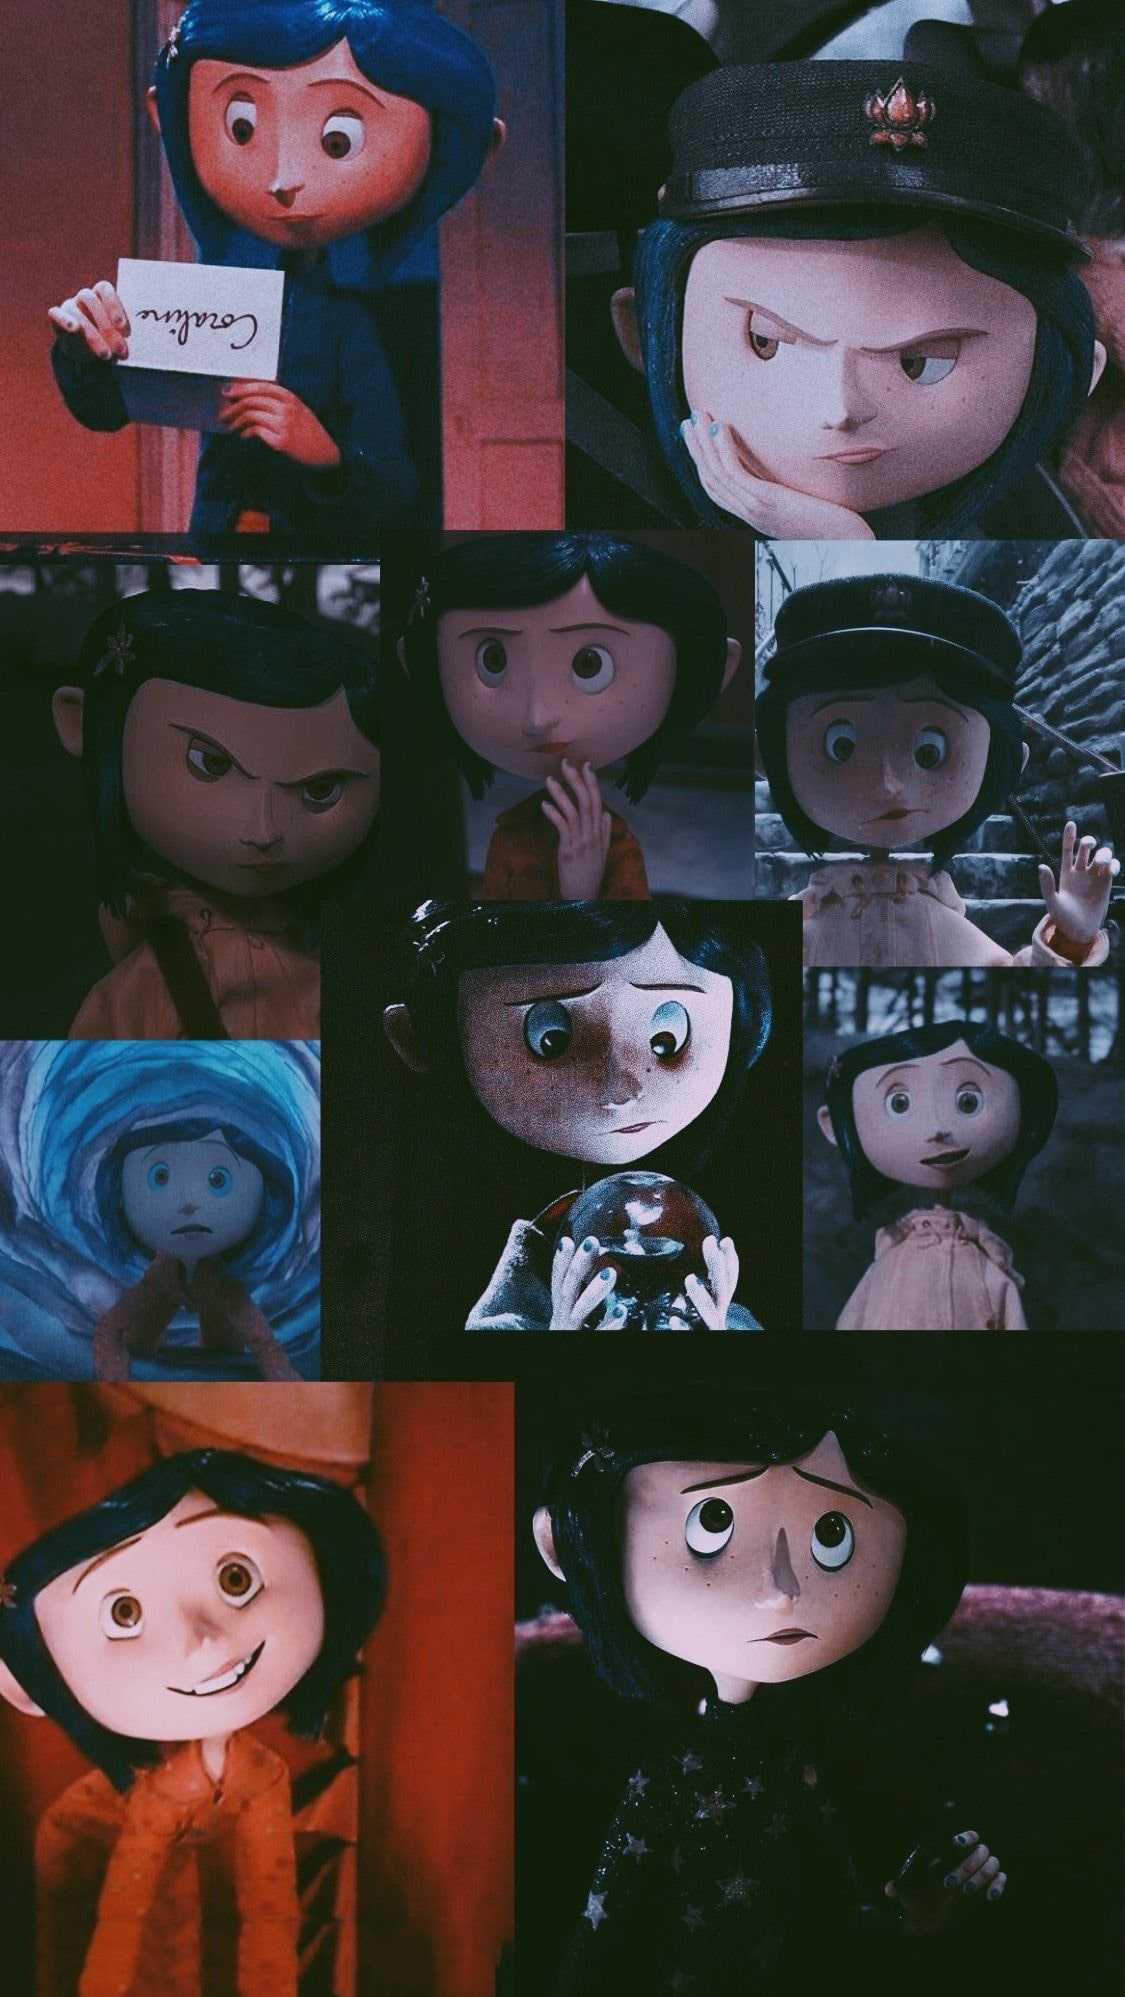 Coraline Collage Wallpaper - KoLPaPer - Awesome Free HD Wallpapers